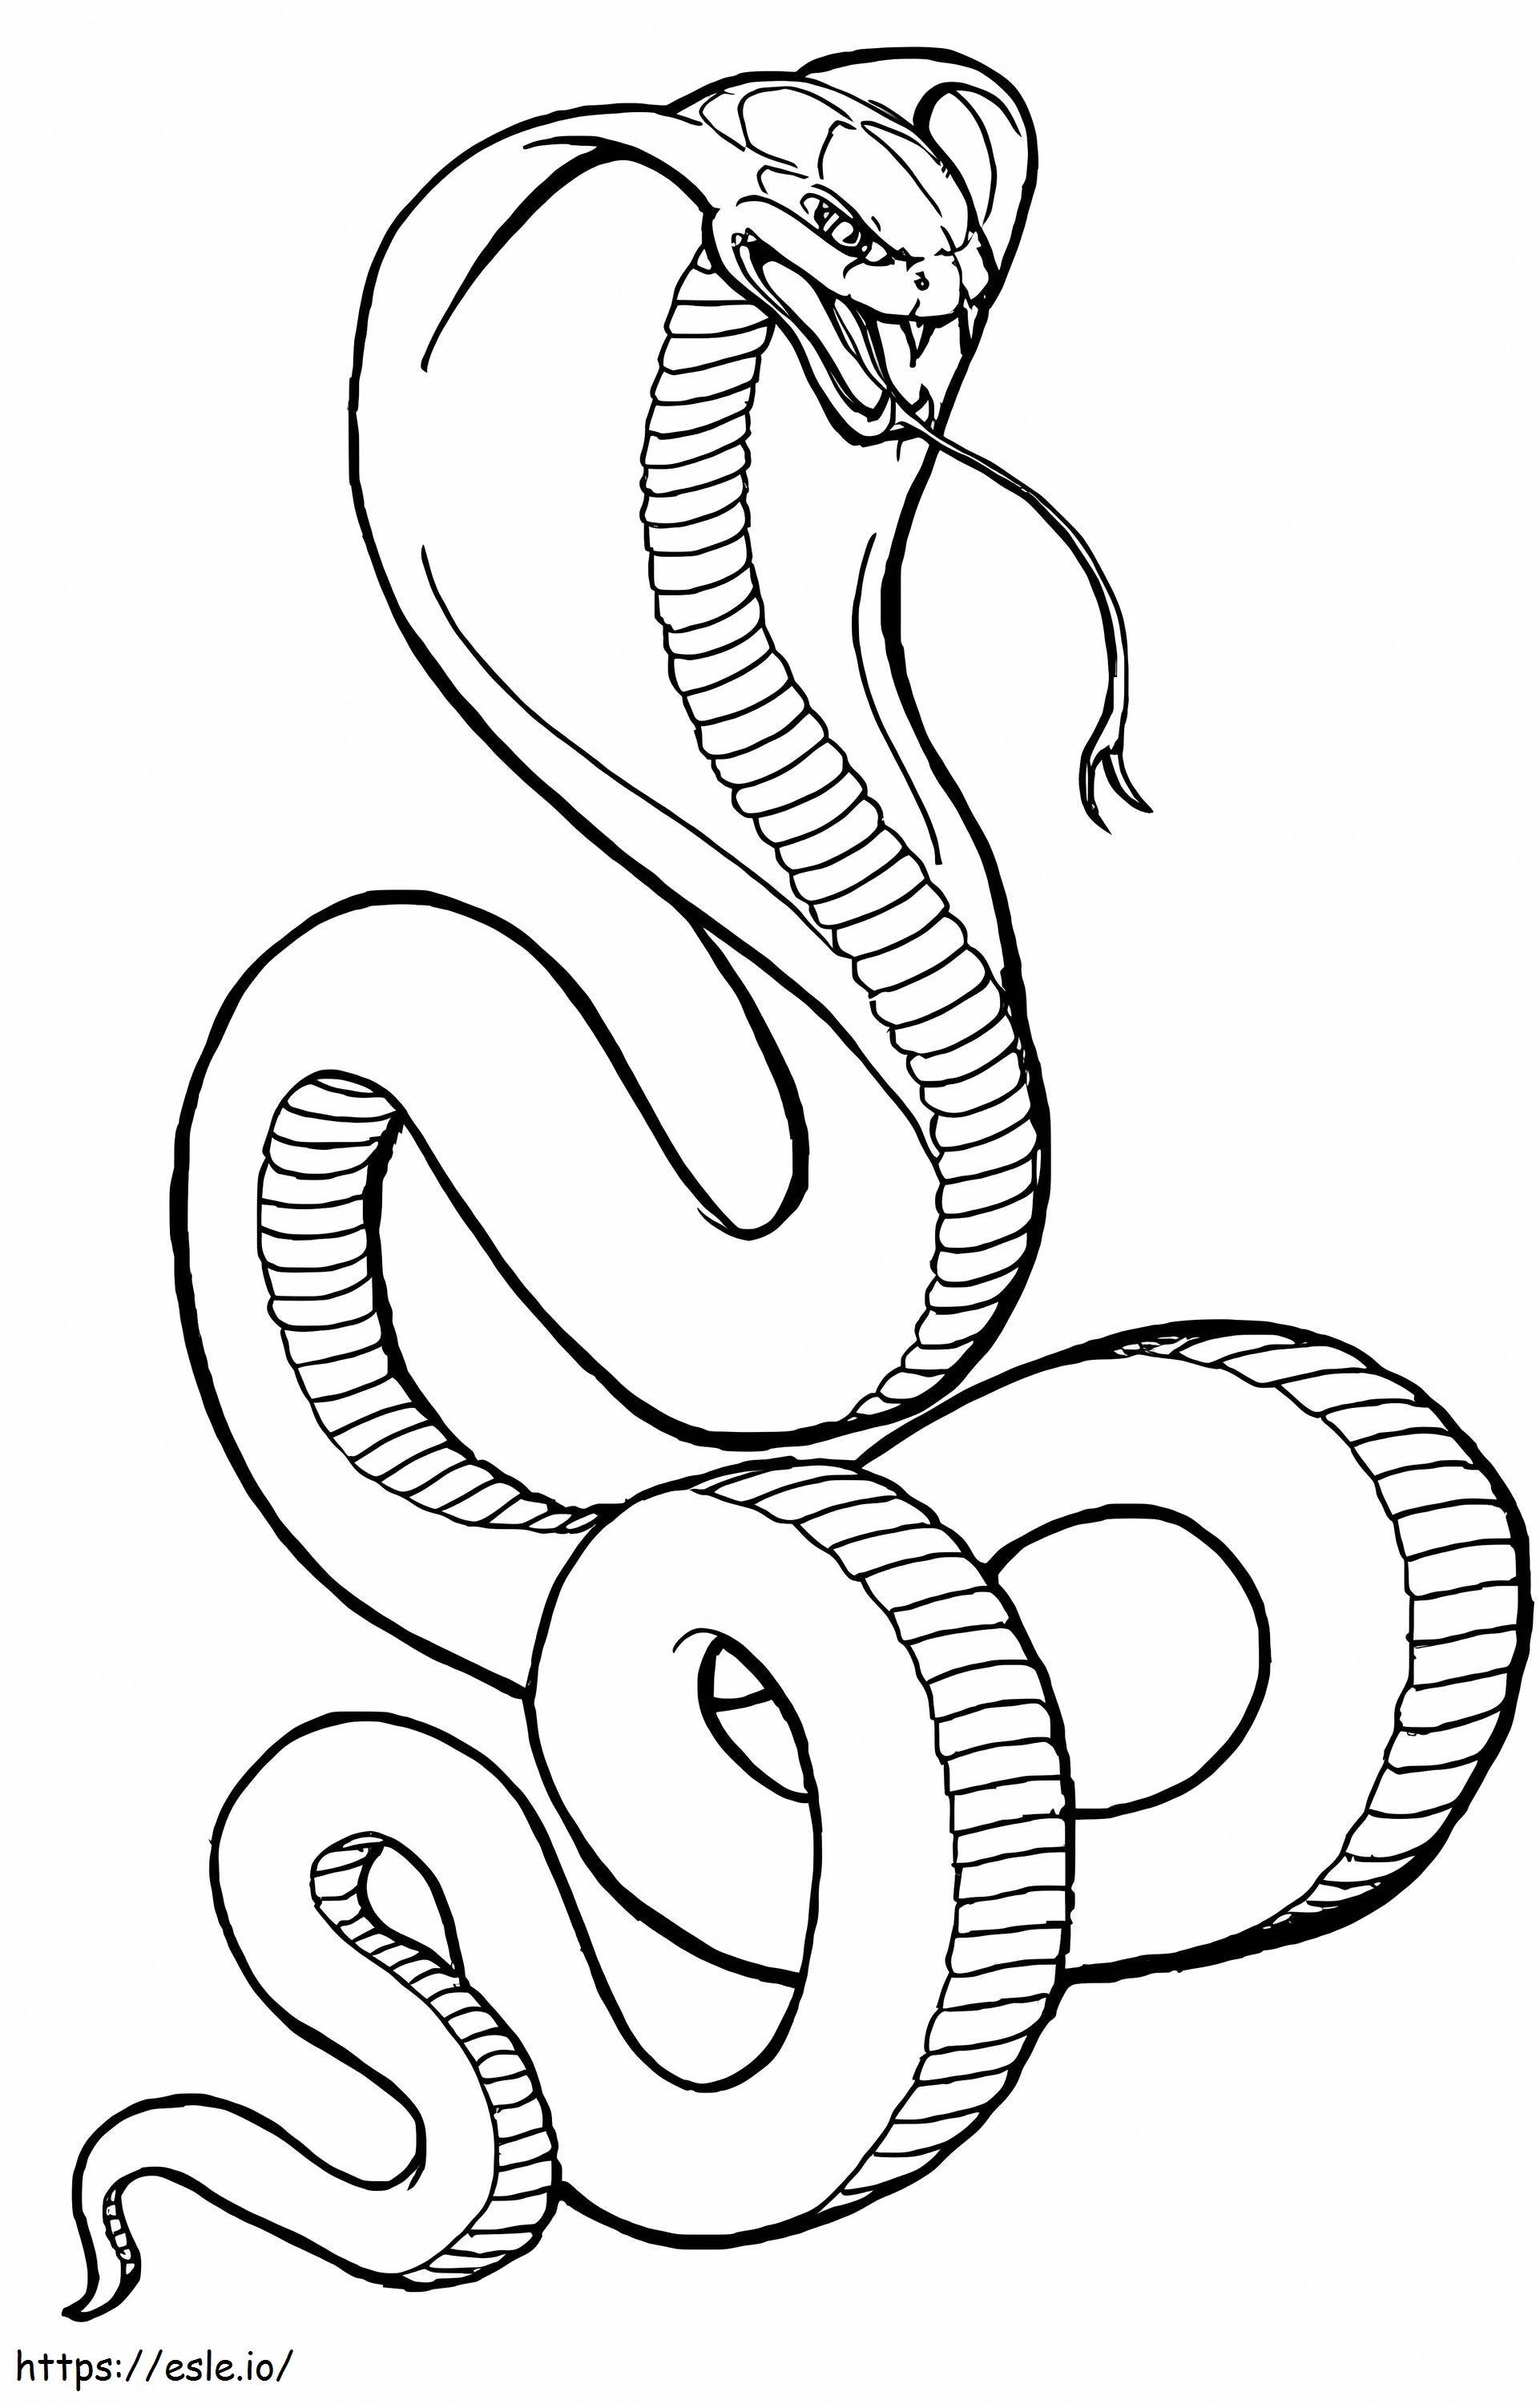 Scary Cobra coloring page